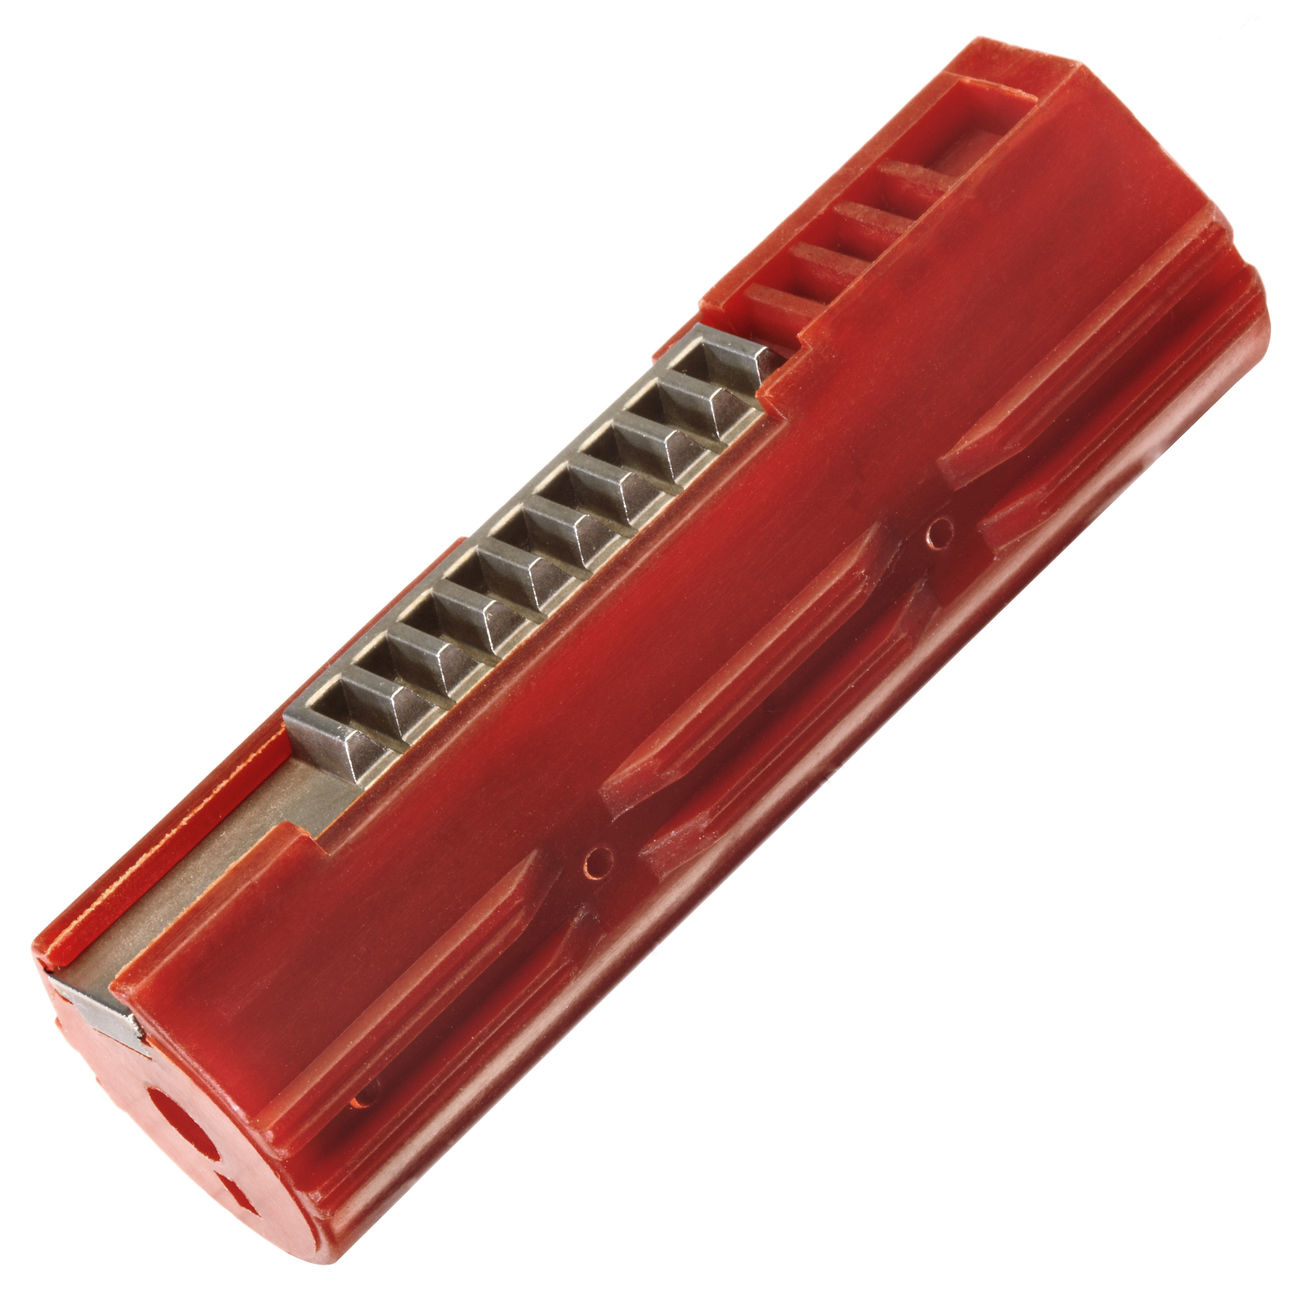 ASG Ultimate M170 Polycarbonate Piston - 14 Full Teeth - Red